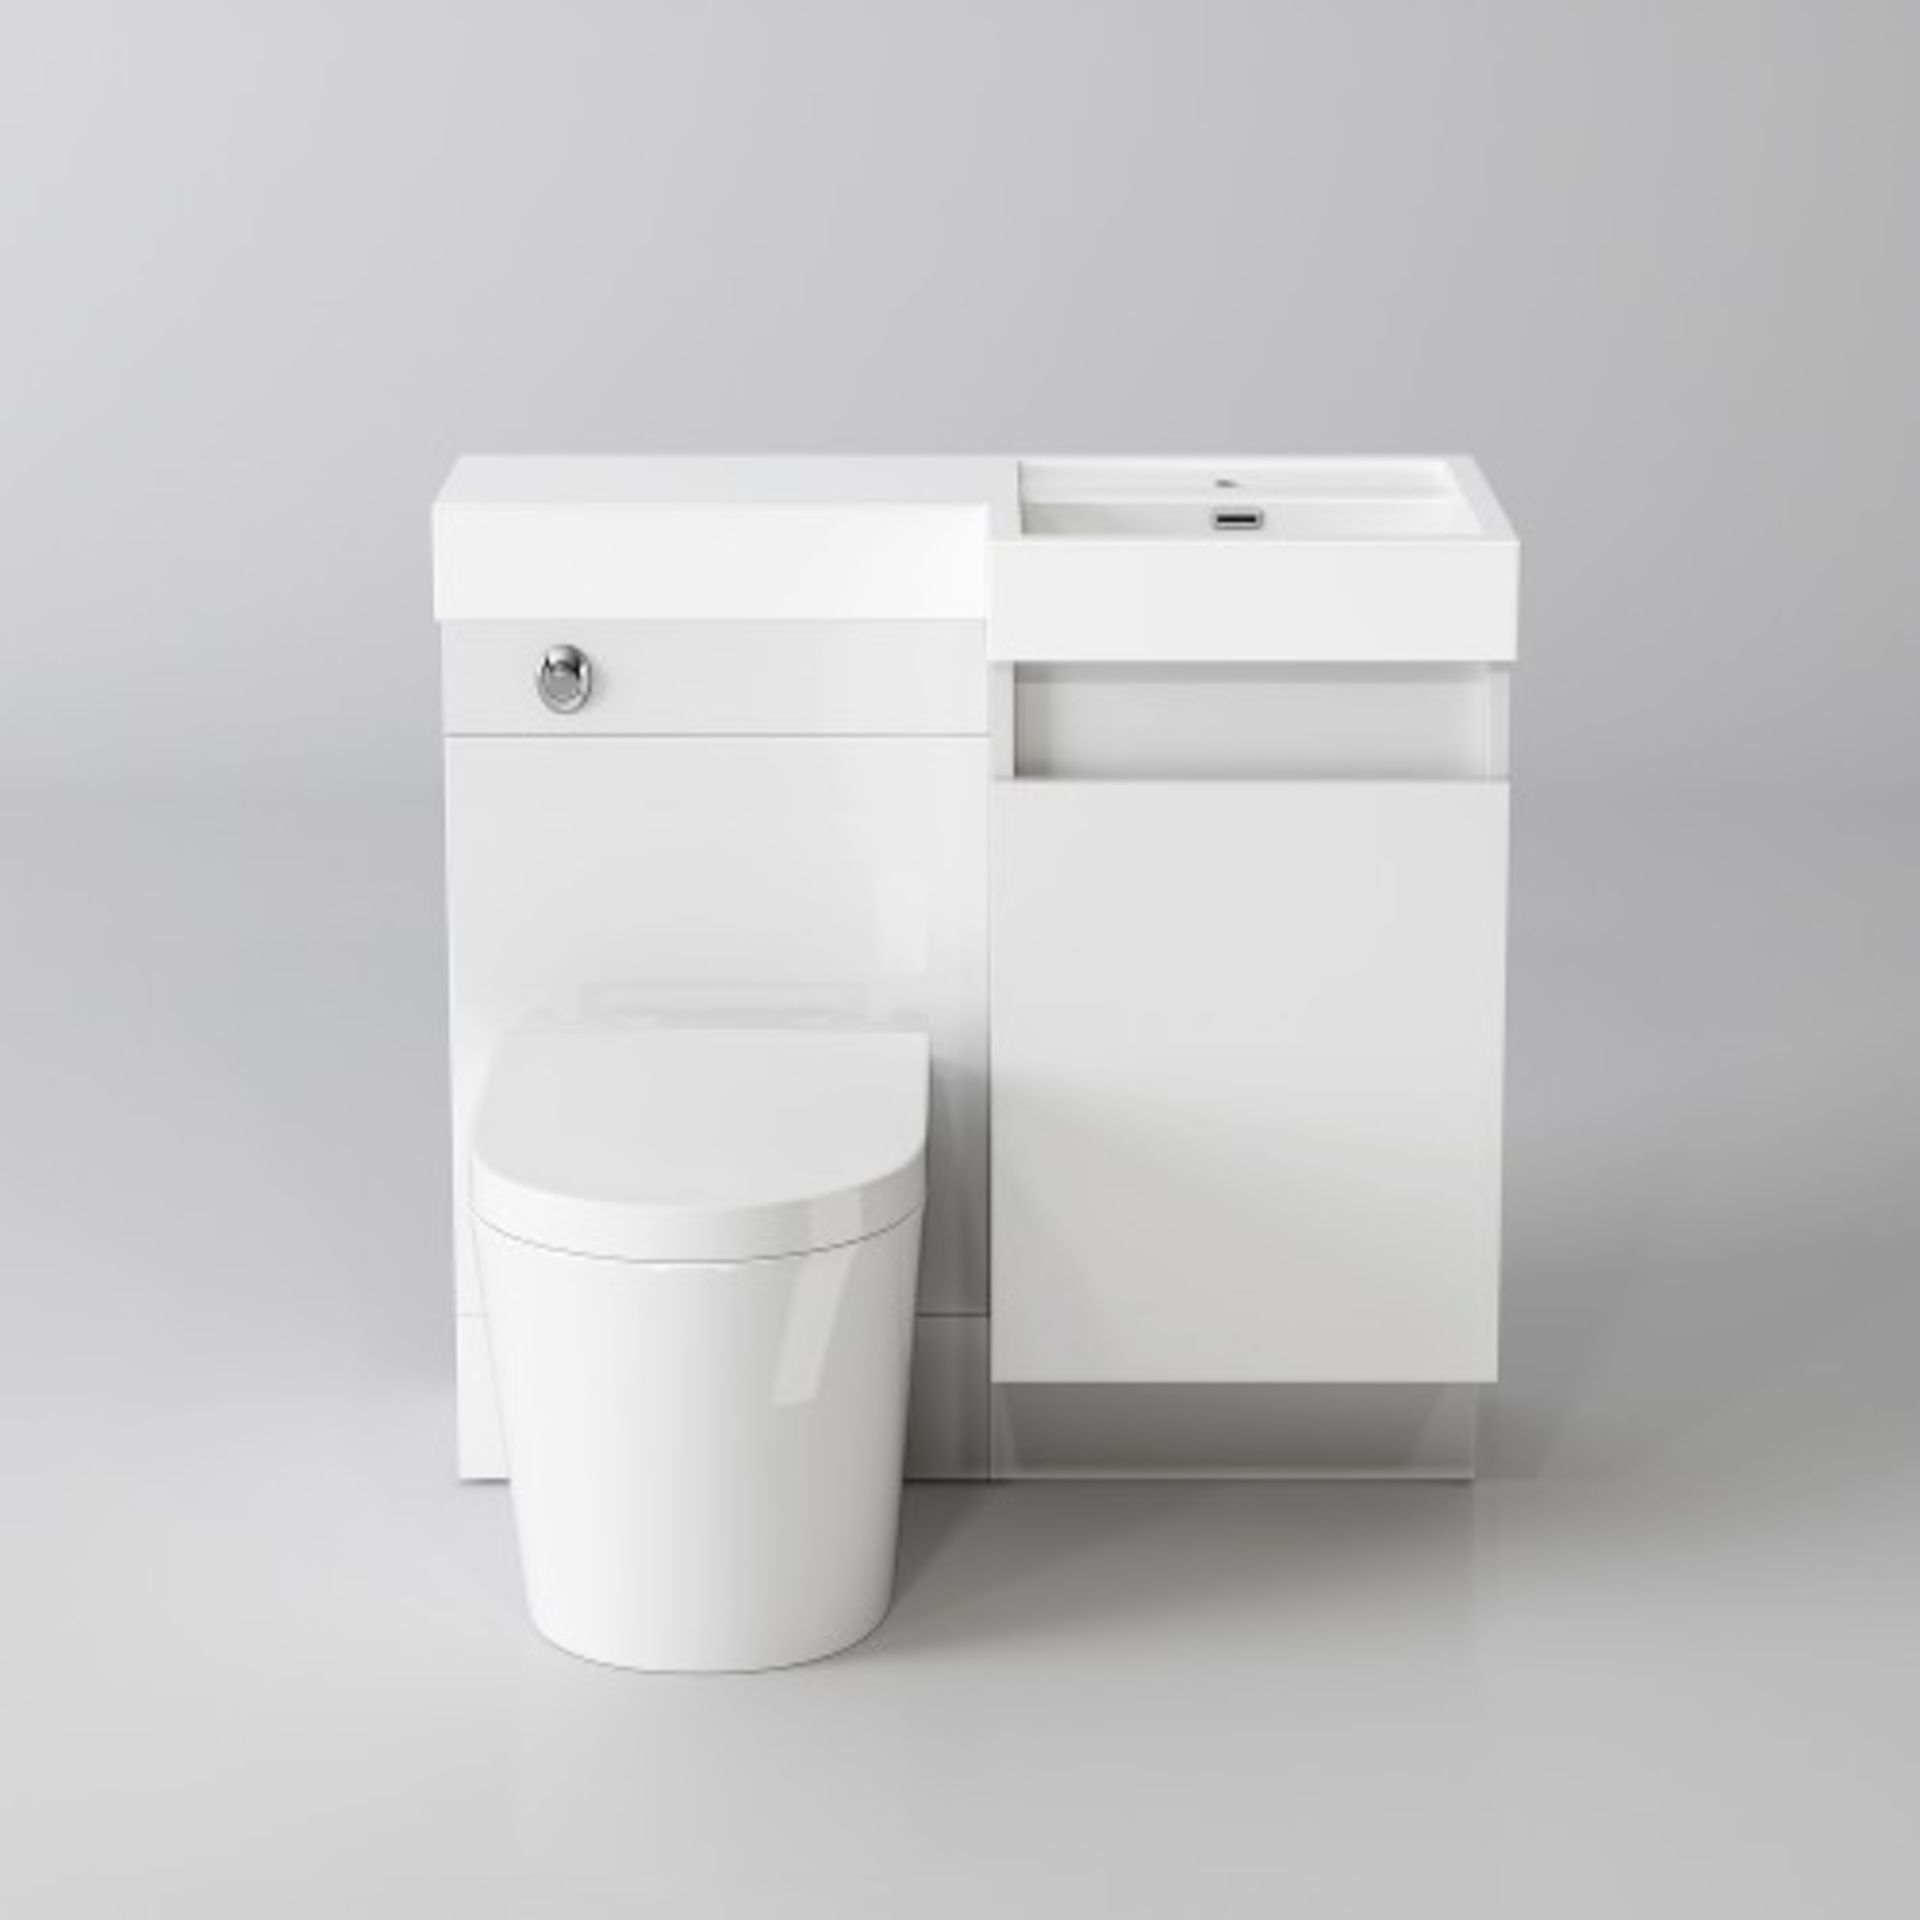 New & Boxed 906mm Olympia Gloss White Drawer Vanity Unit - Lyon Pan, Right Hand. Basin, Unit A... - Image 3 of 4